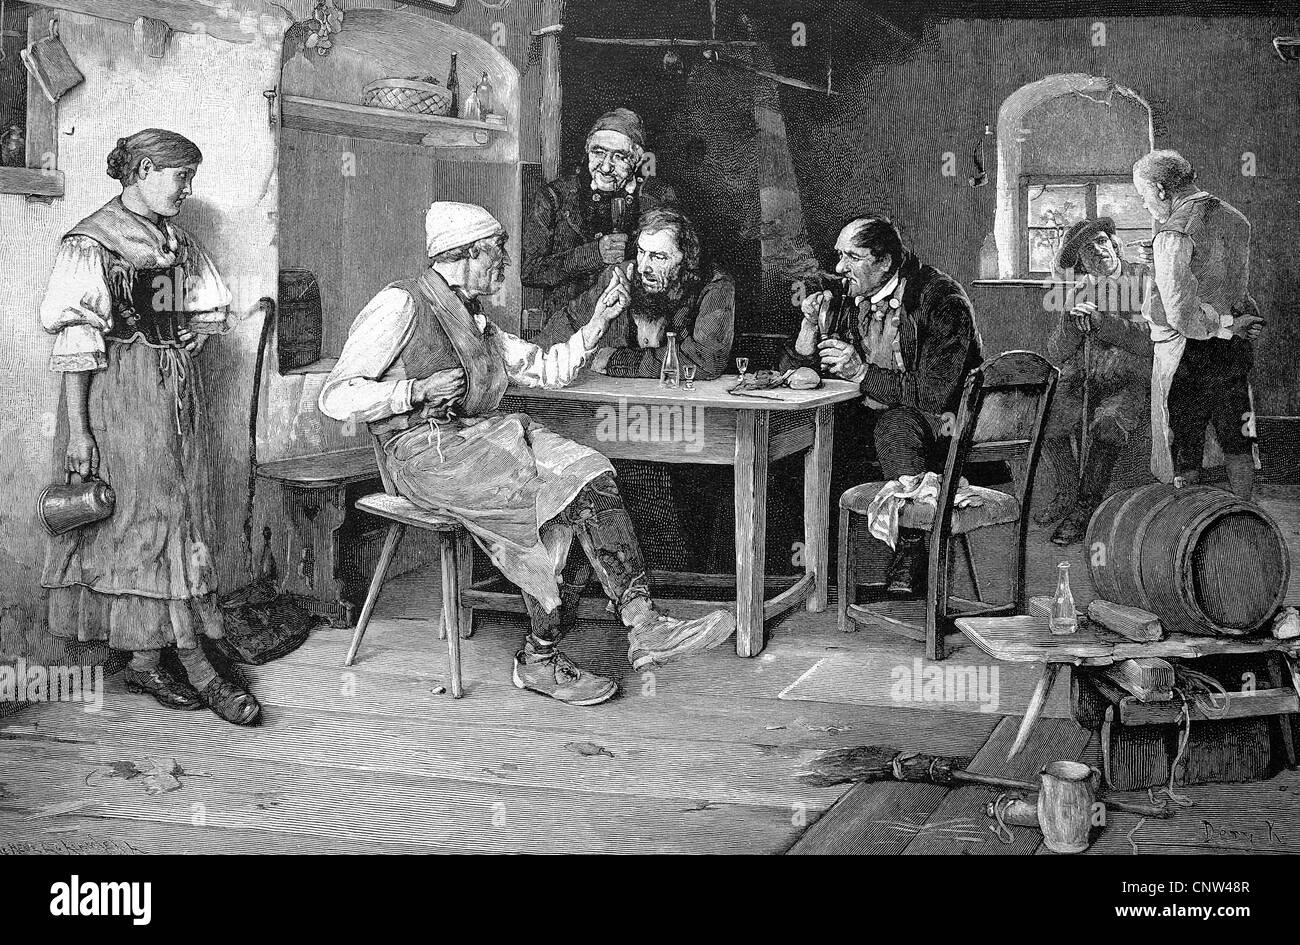 Farmers in the pub on Sunday, historical wood engraving, 1886 Stock Photo